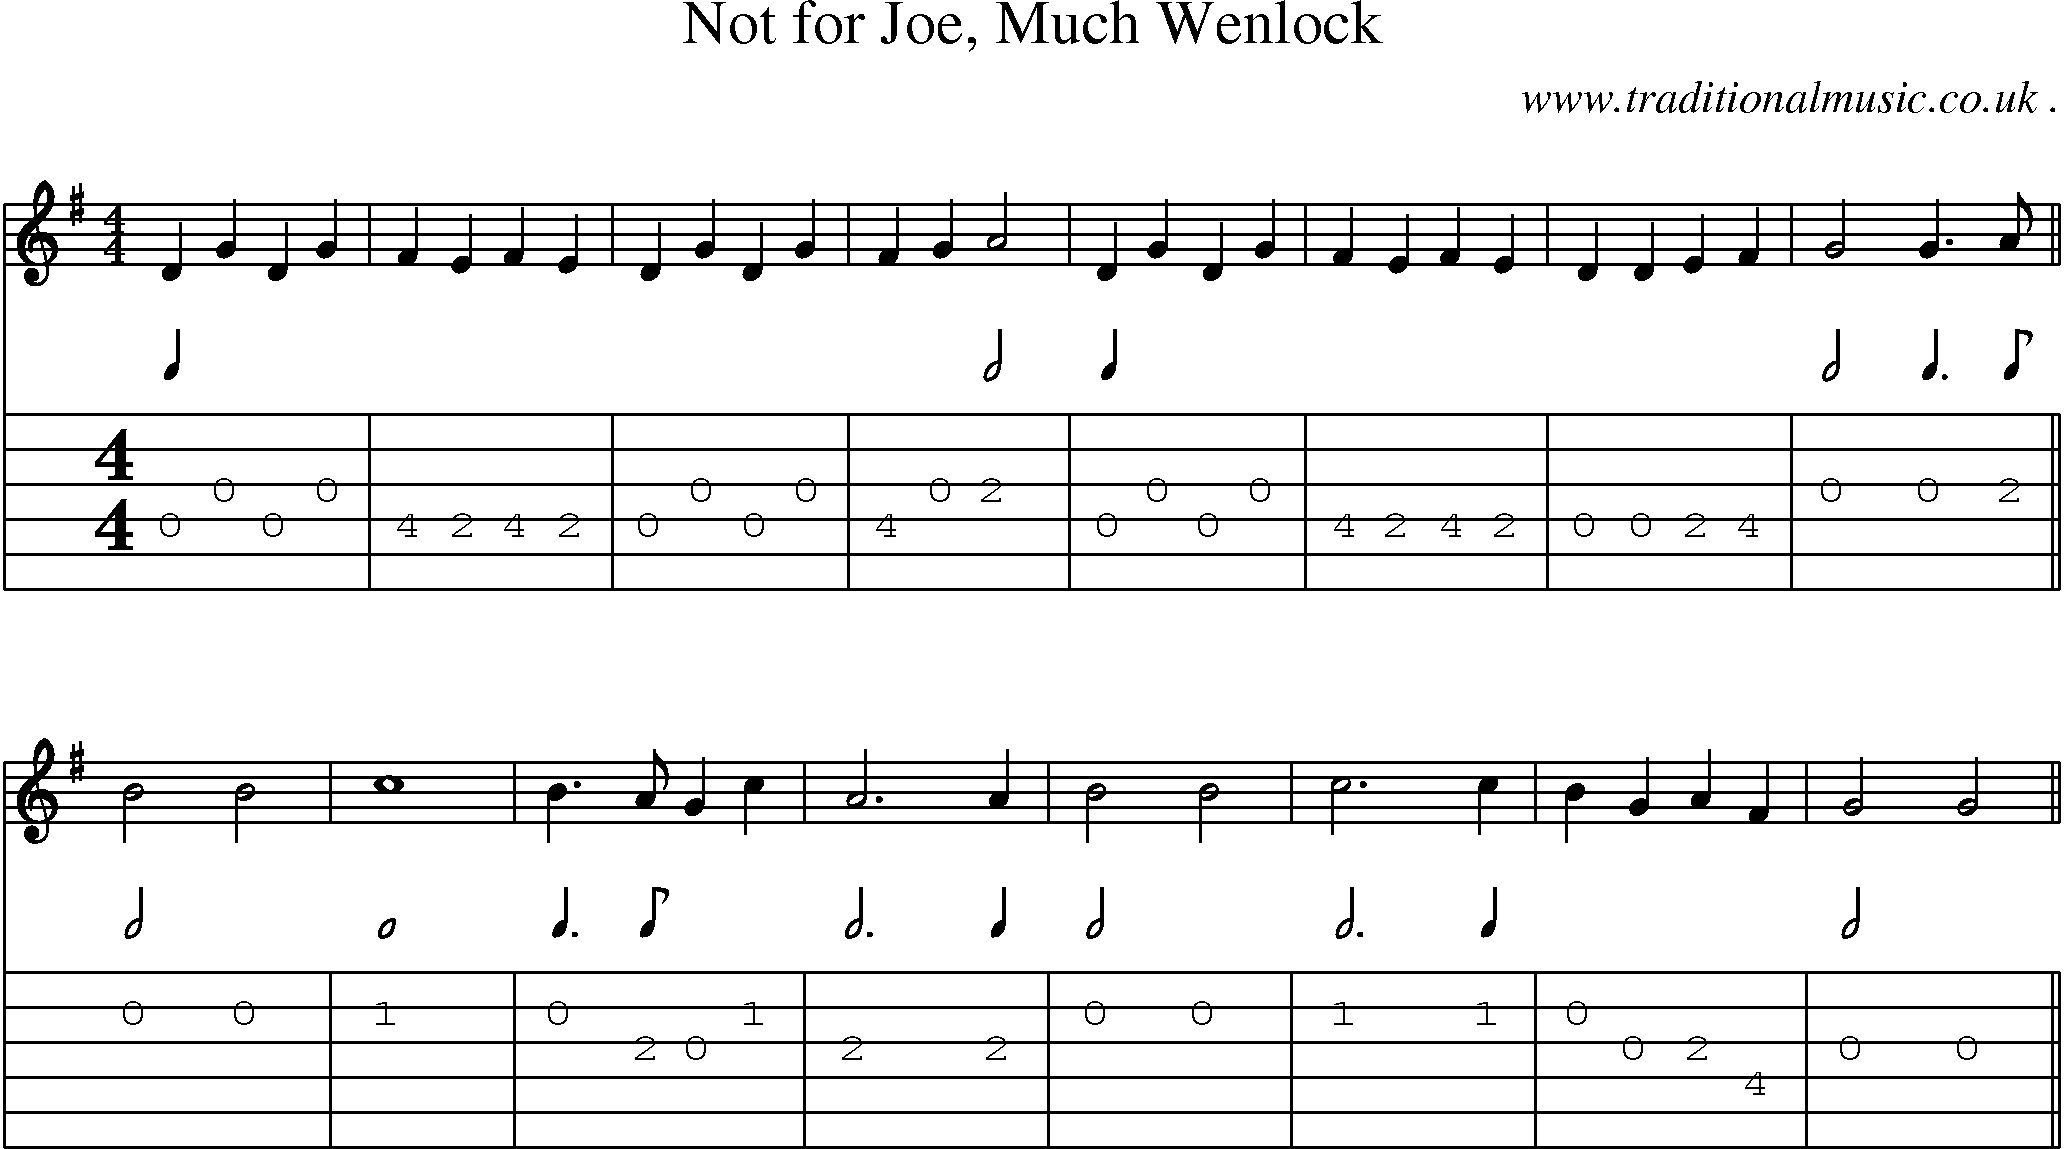 Sheet-Music and Guitar Tabs for Not For Joe Much Wenlock